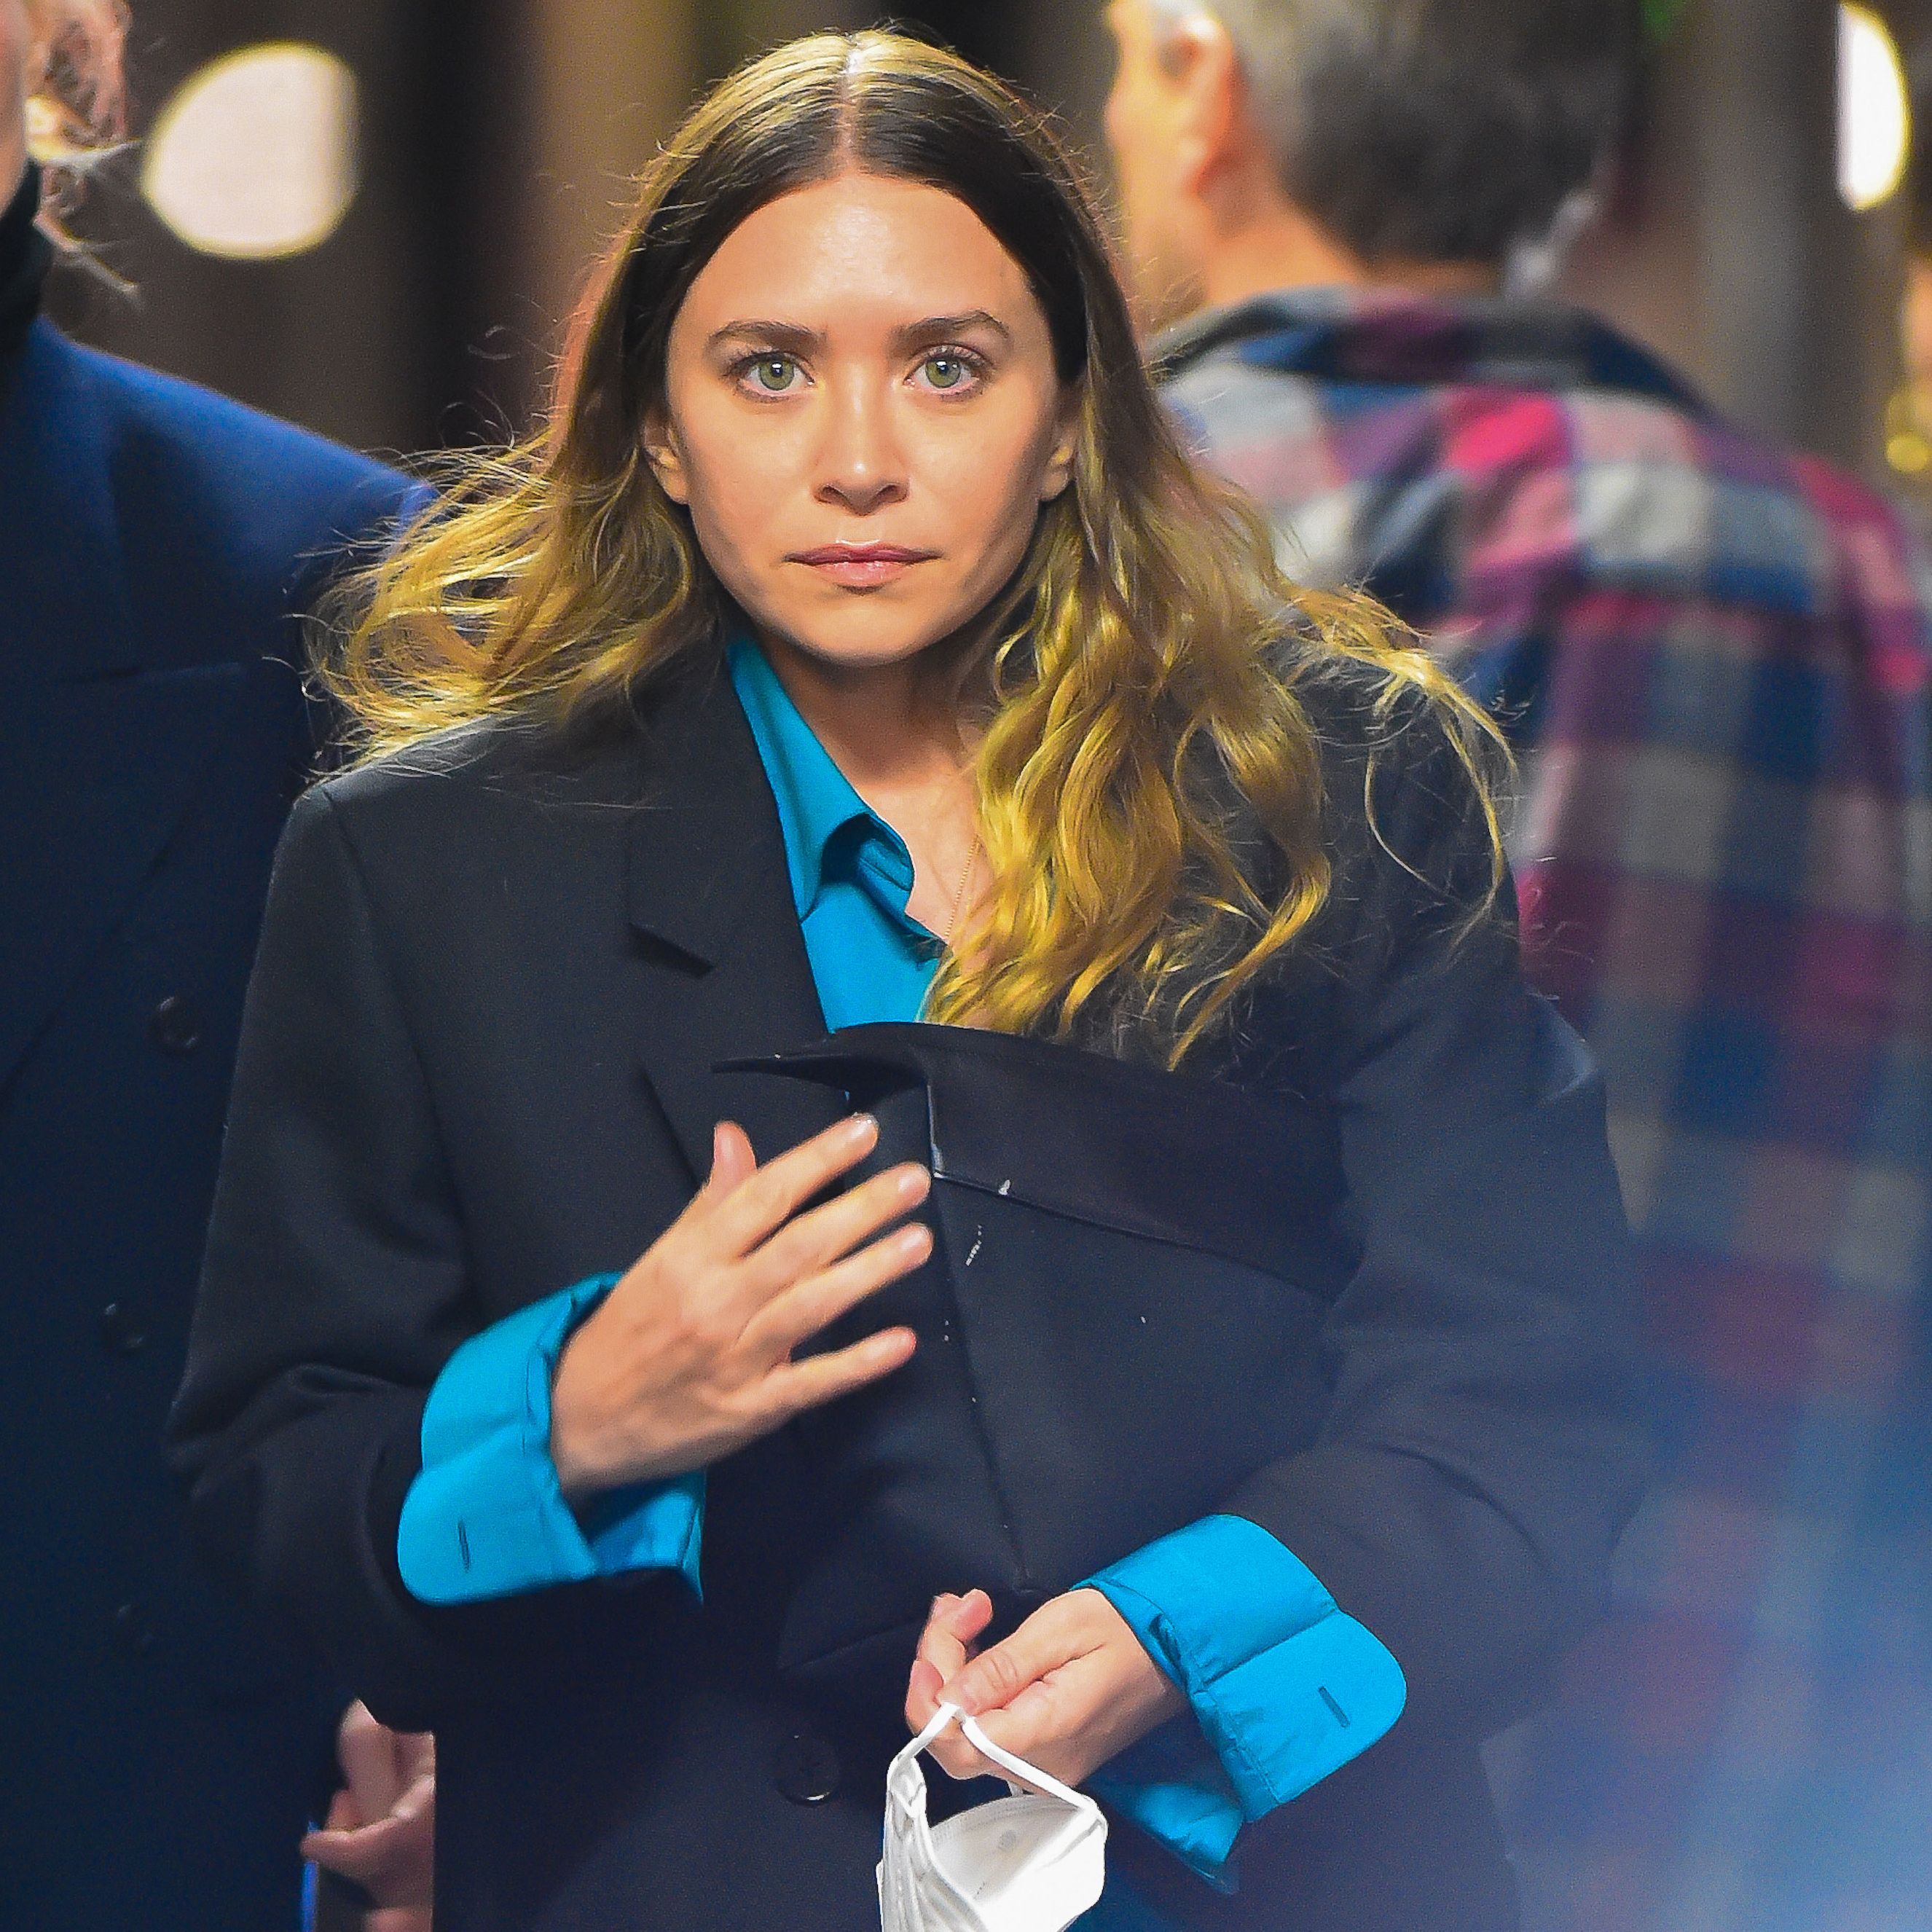 How Ashley Olsen Managed to Hide Her Pregnancy From 'A Lot of Friends'